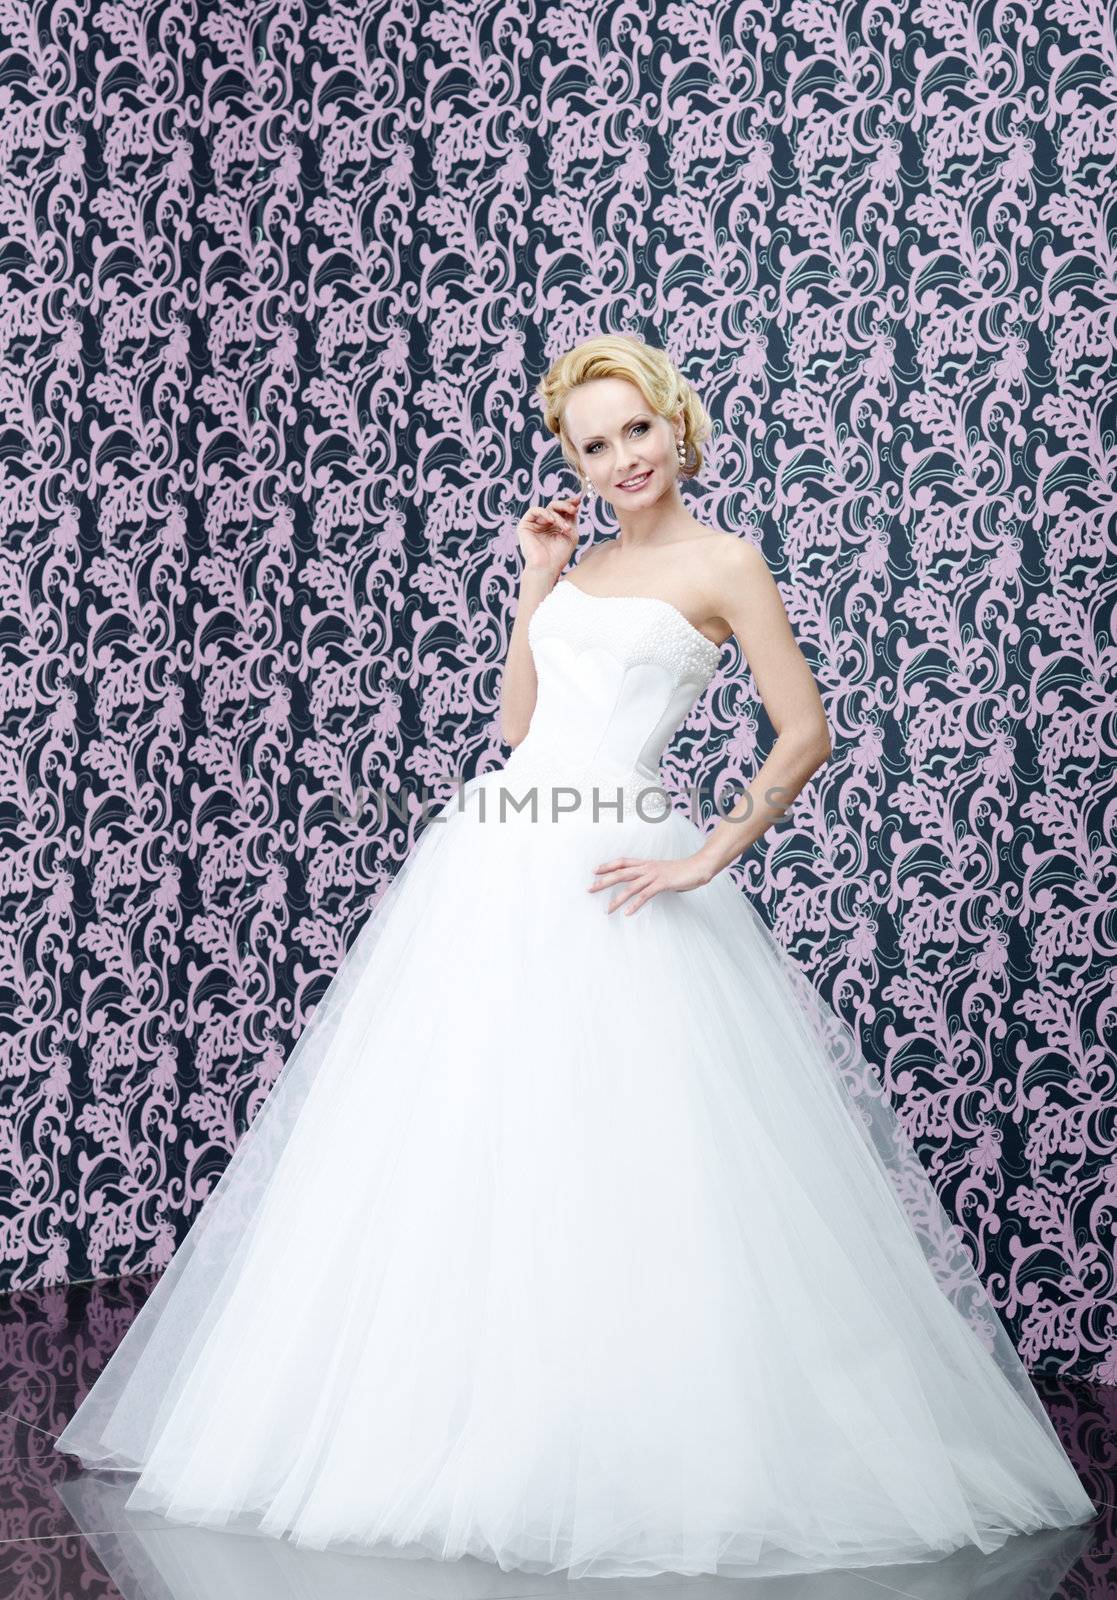 Young adult blonde bride full length portrait. She is touching her curly hair and smiling